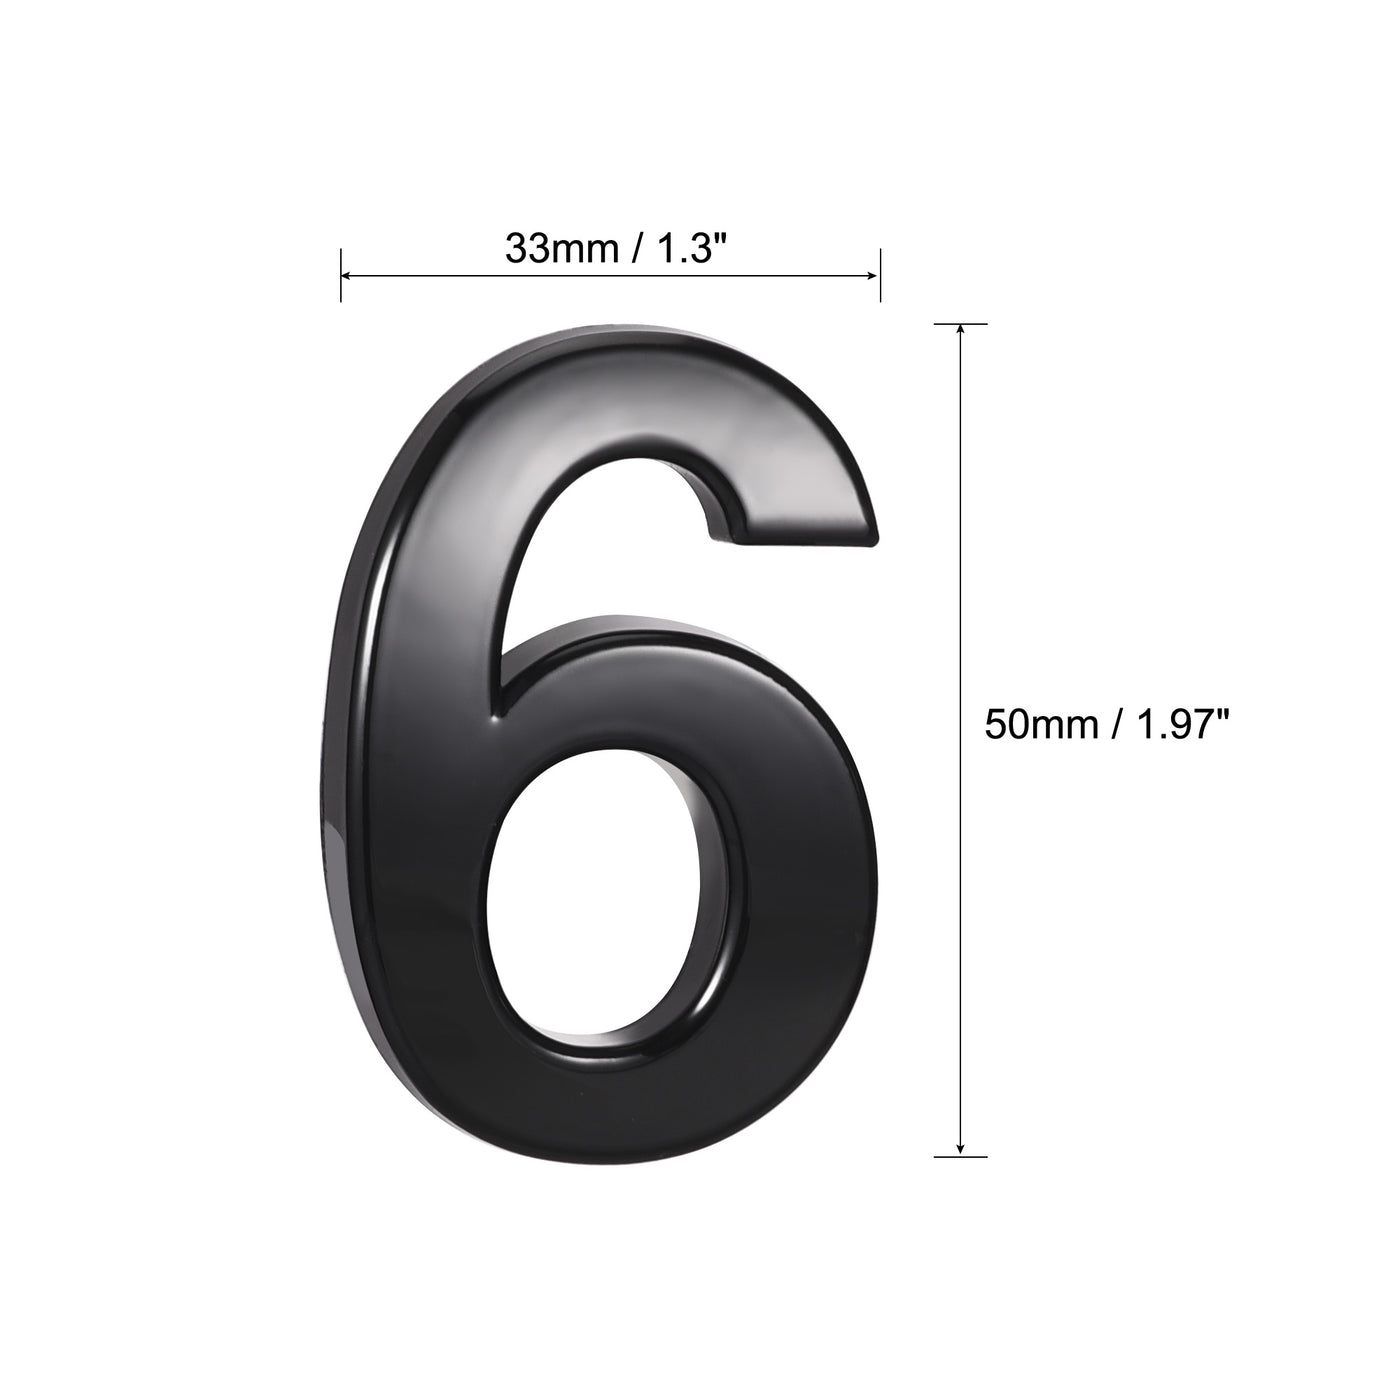 Uxcell Uxcell Self Adhesive House Number, 1.97 Inch ABS Plastic Number 3 for House Hotel Mailbox Address Sign Black 2 Pcs